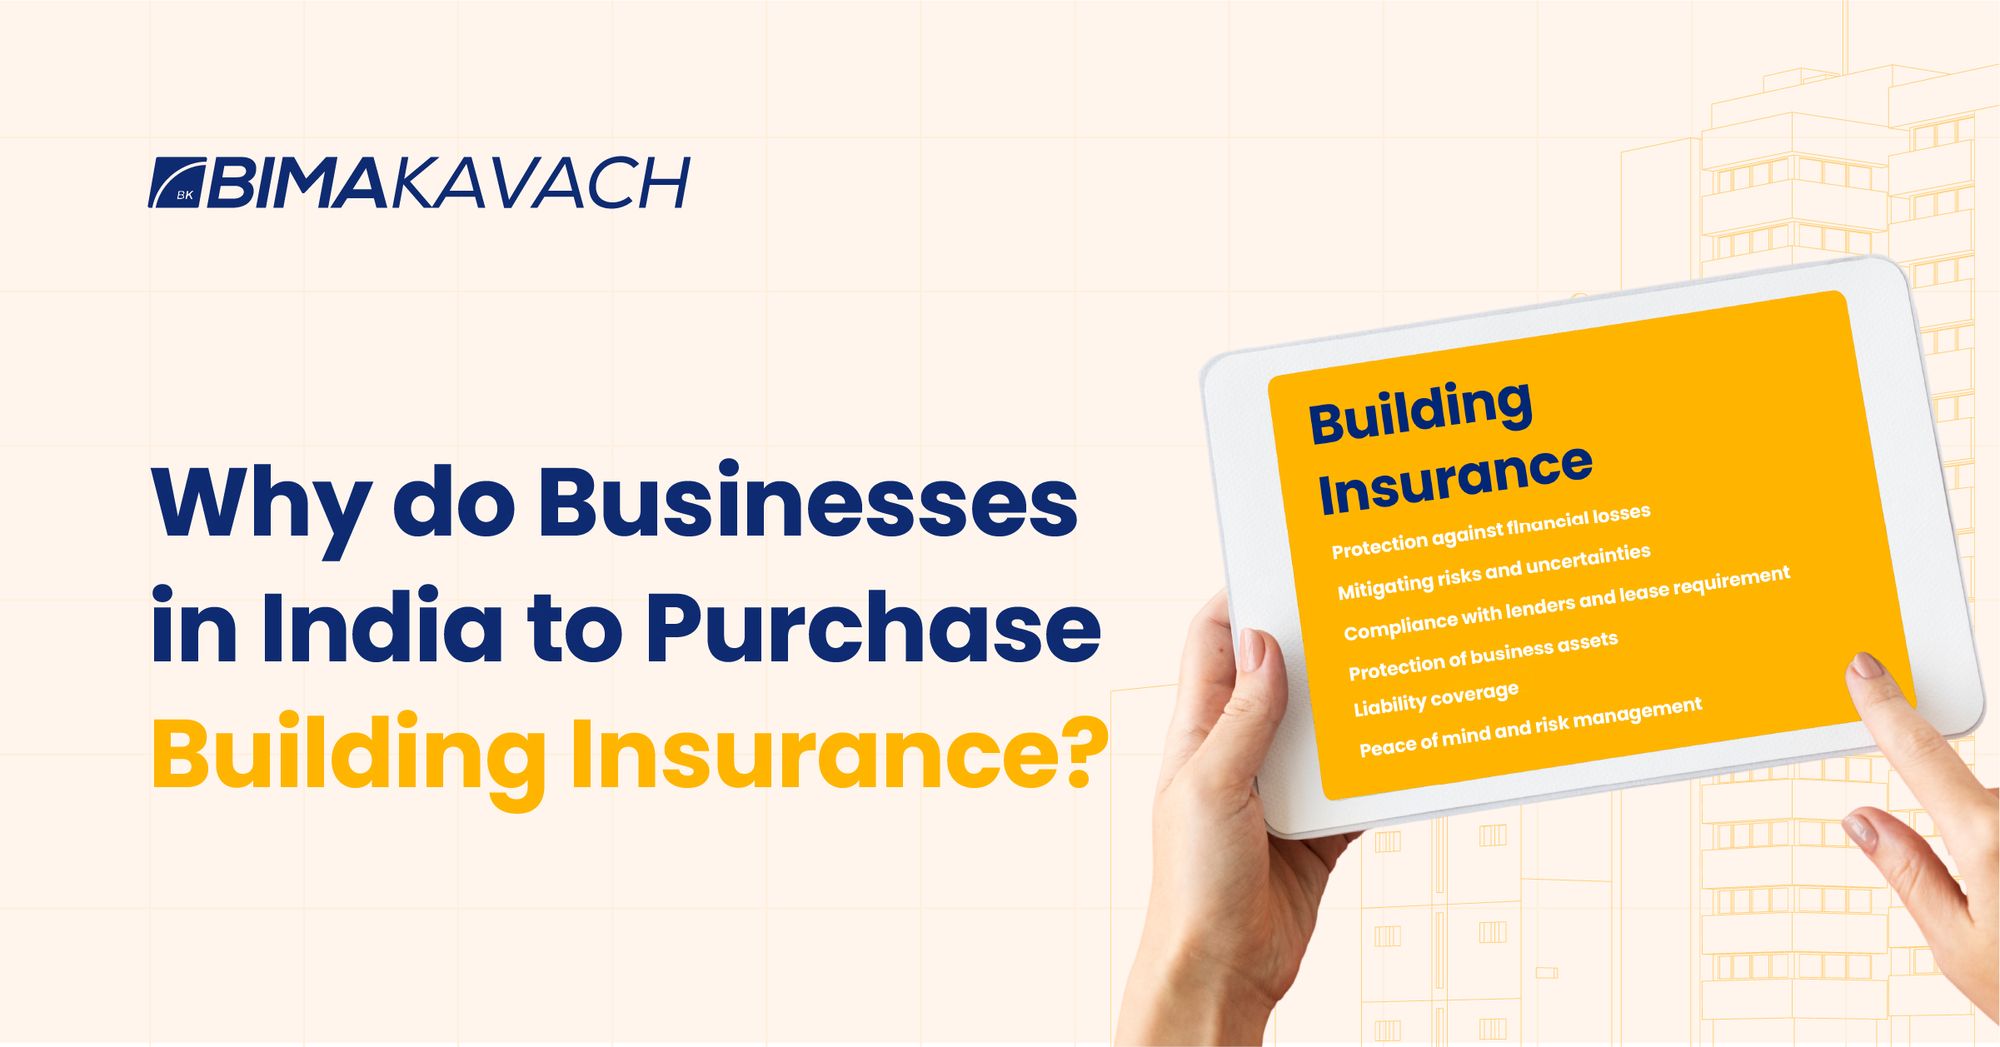 Why do Businesses in India to Purchase Building Insurance?